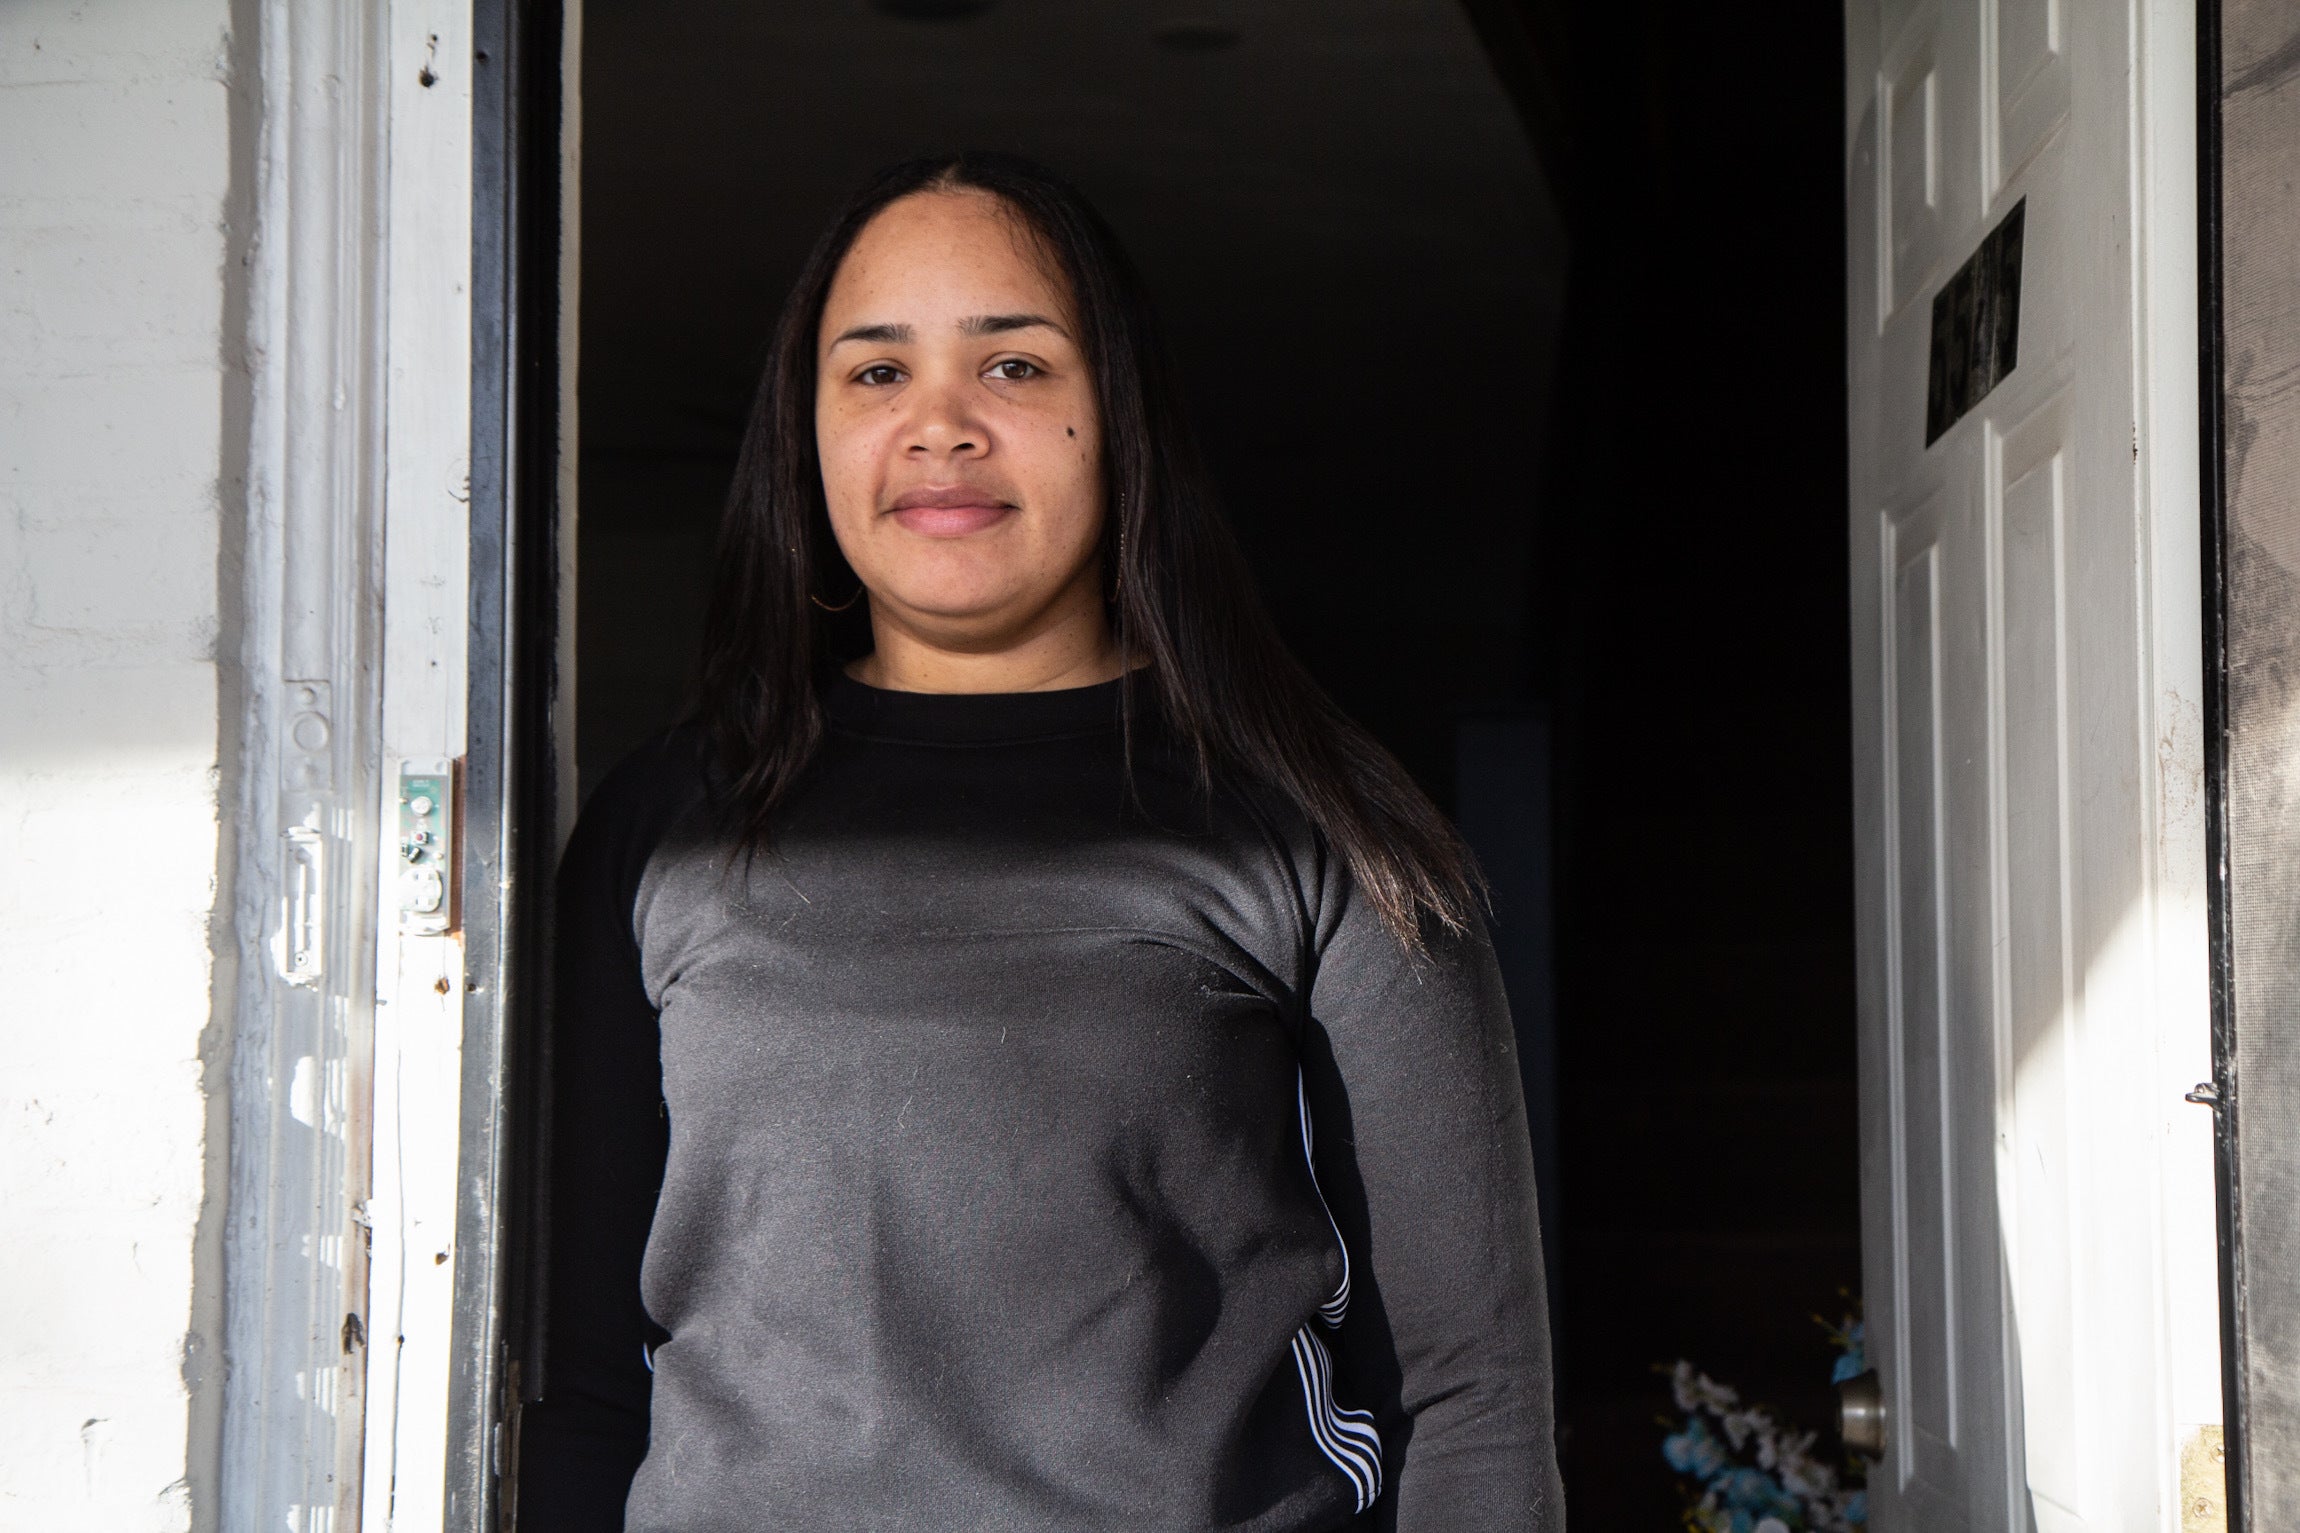 Jessica Ramos at her home in West Philadelphia.